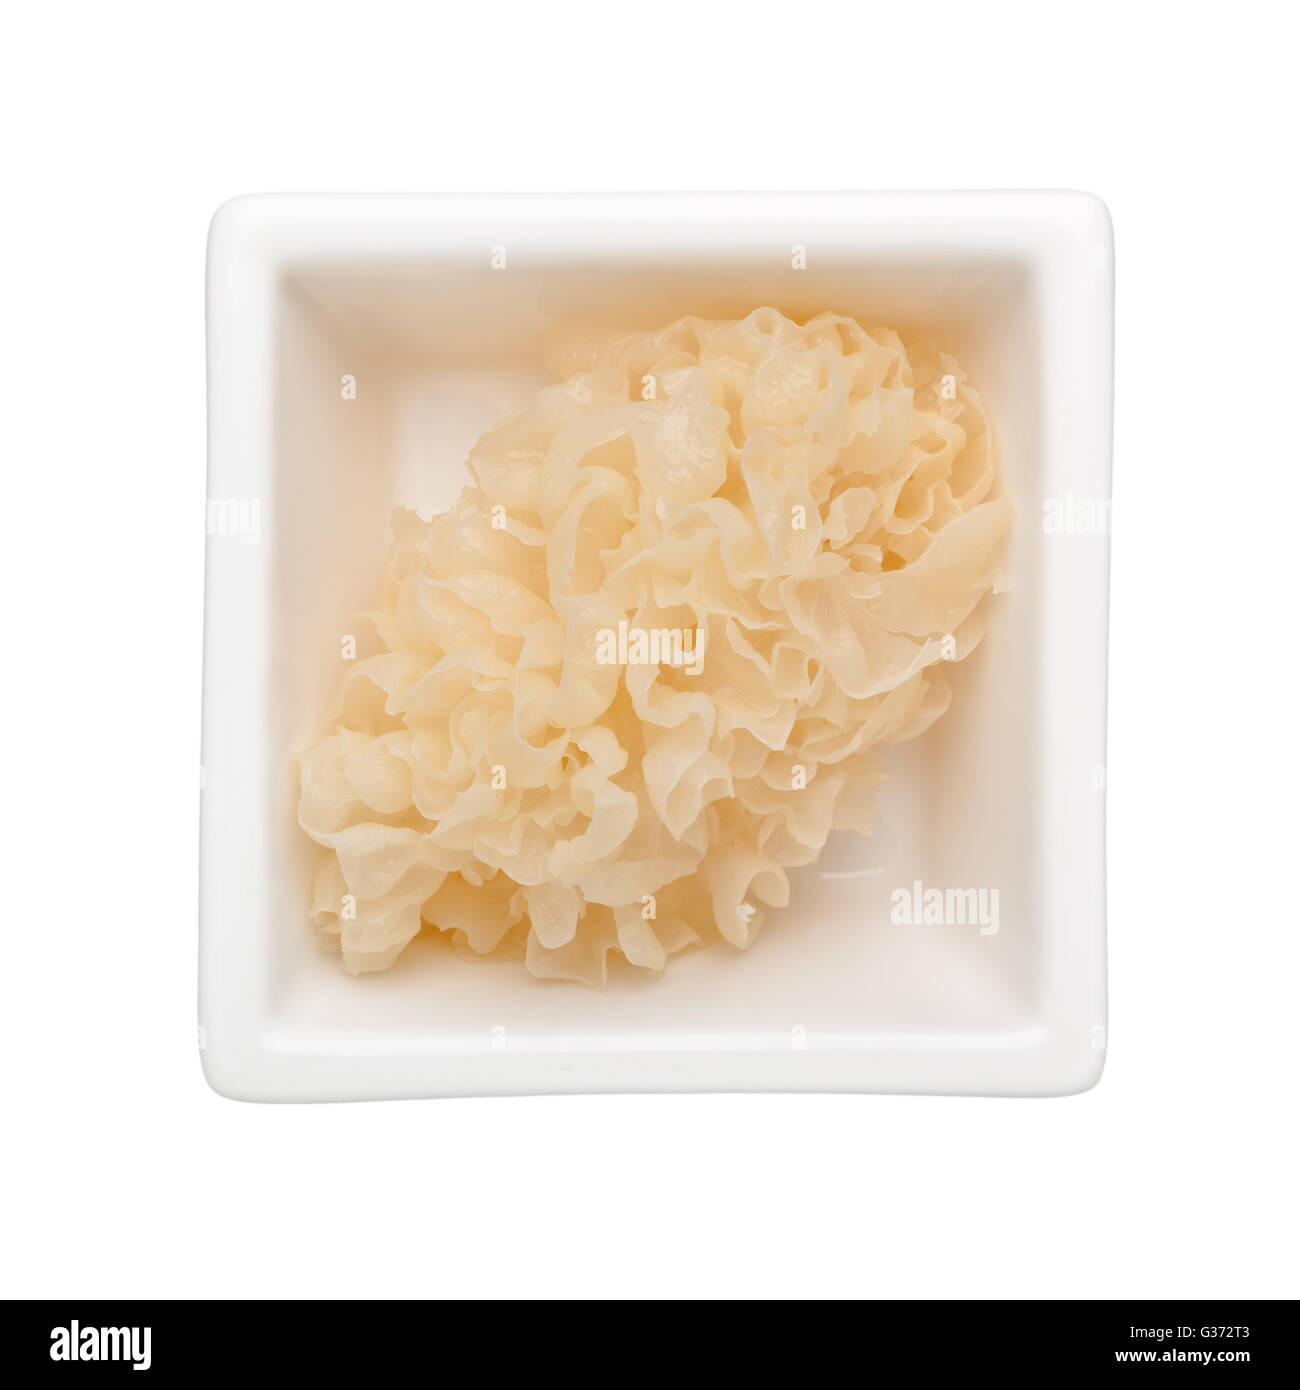 White fungus in a square bowl isolated on white background Stock Photo